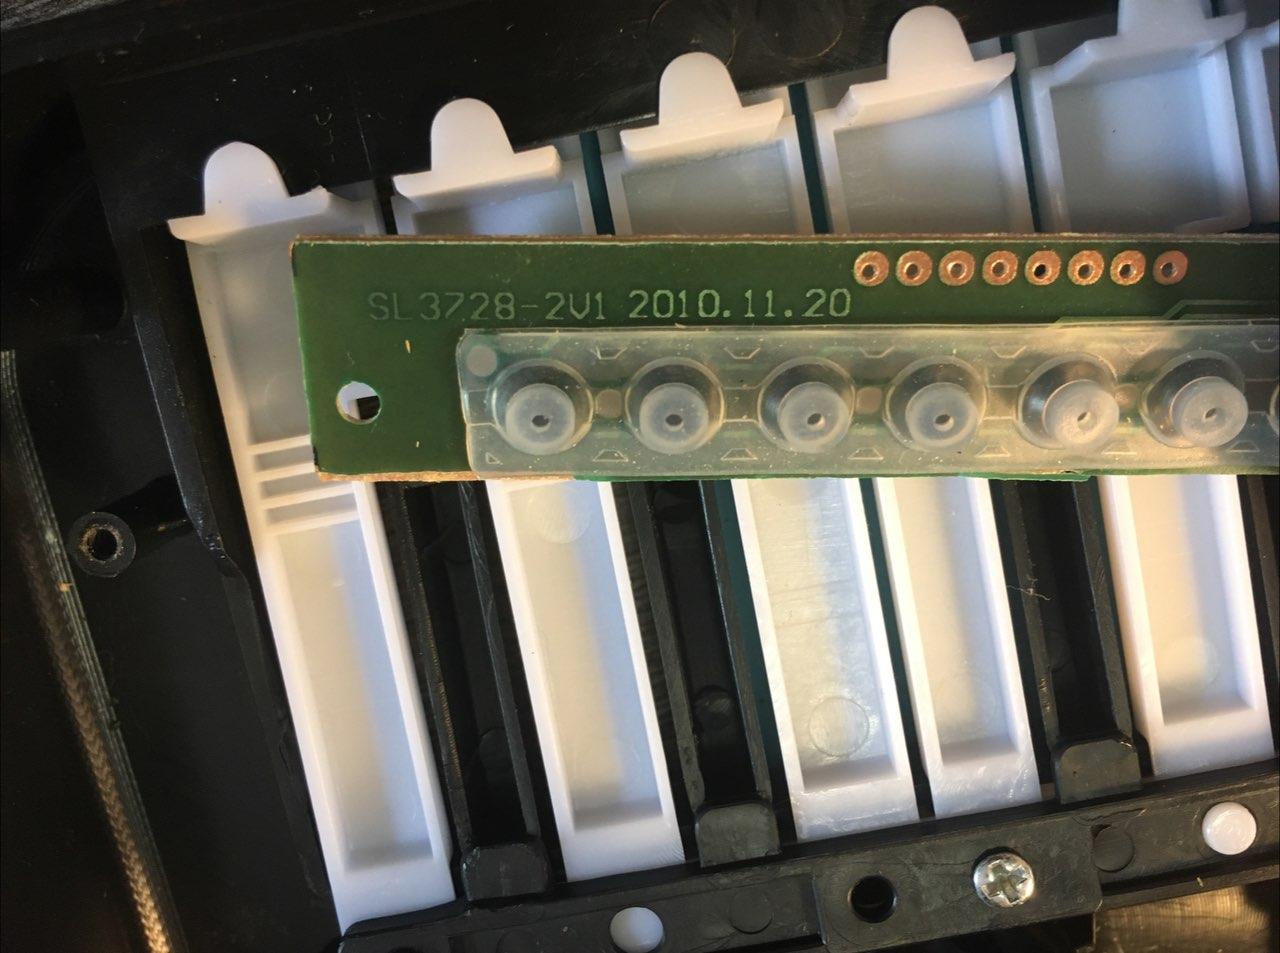 Part number and date on keyboard PCB